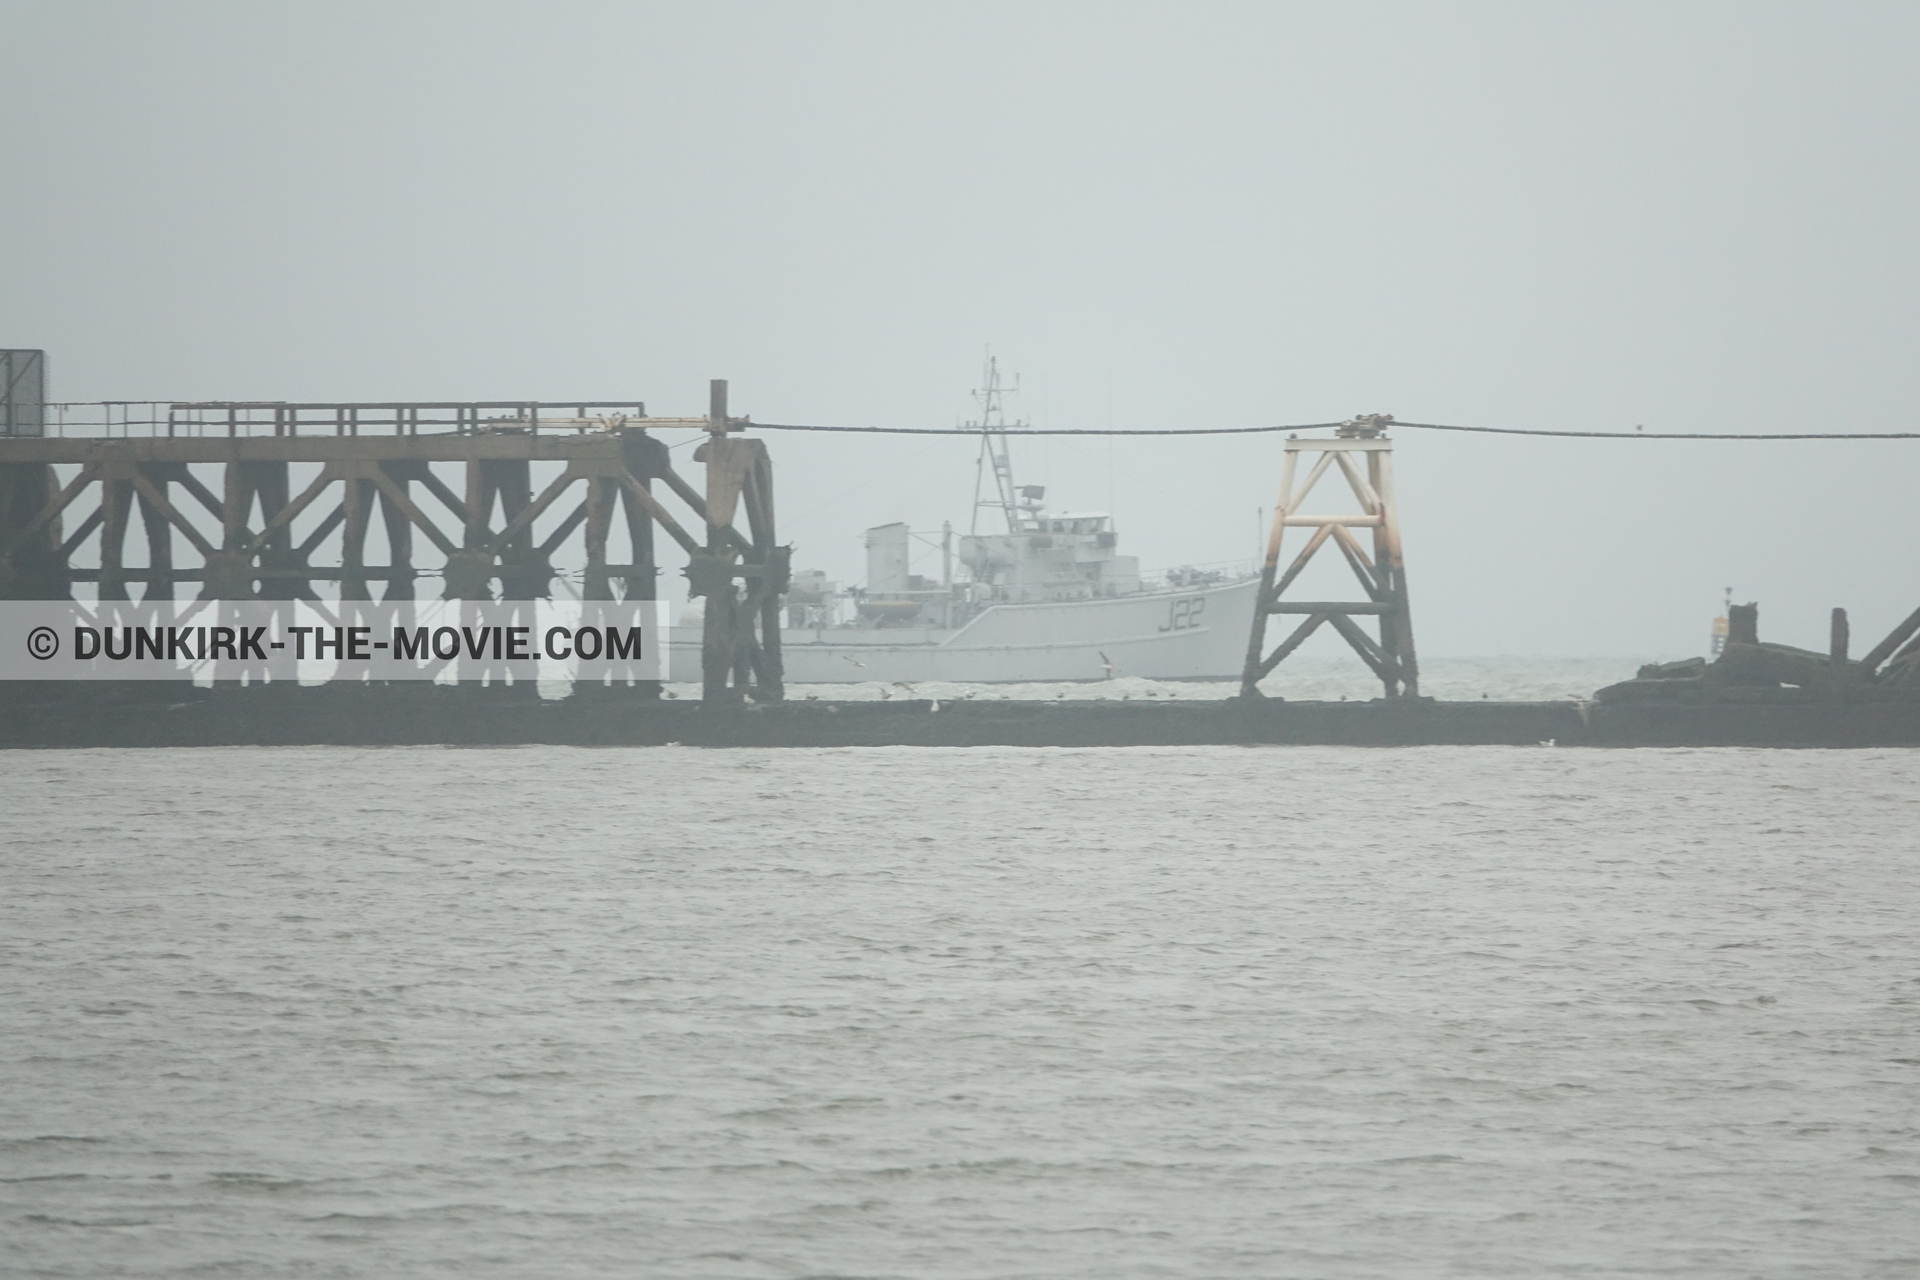 Picture with grey sky, J22 -Hr.Ms. Naaldwijk, calm sea,  from behind the scene of the Dunkirk movie by Nolan